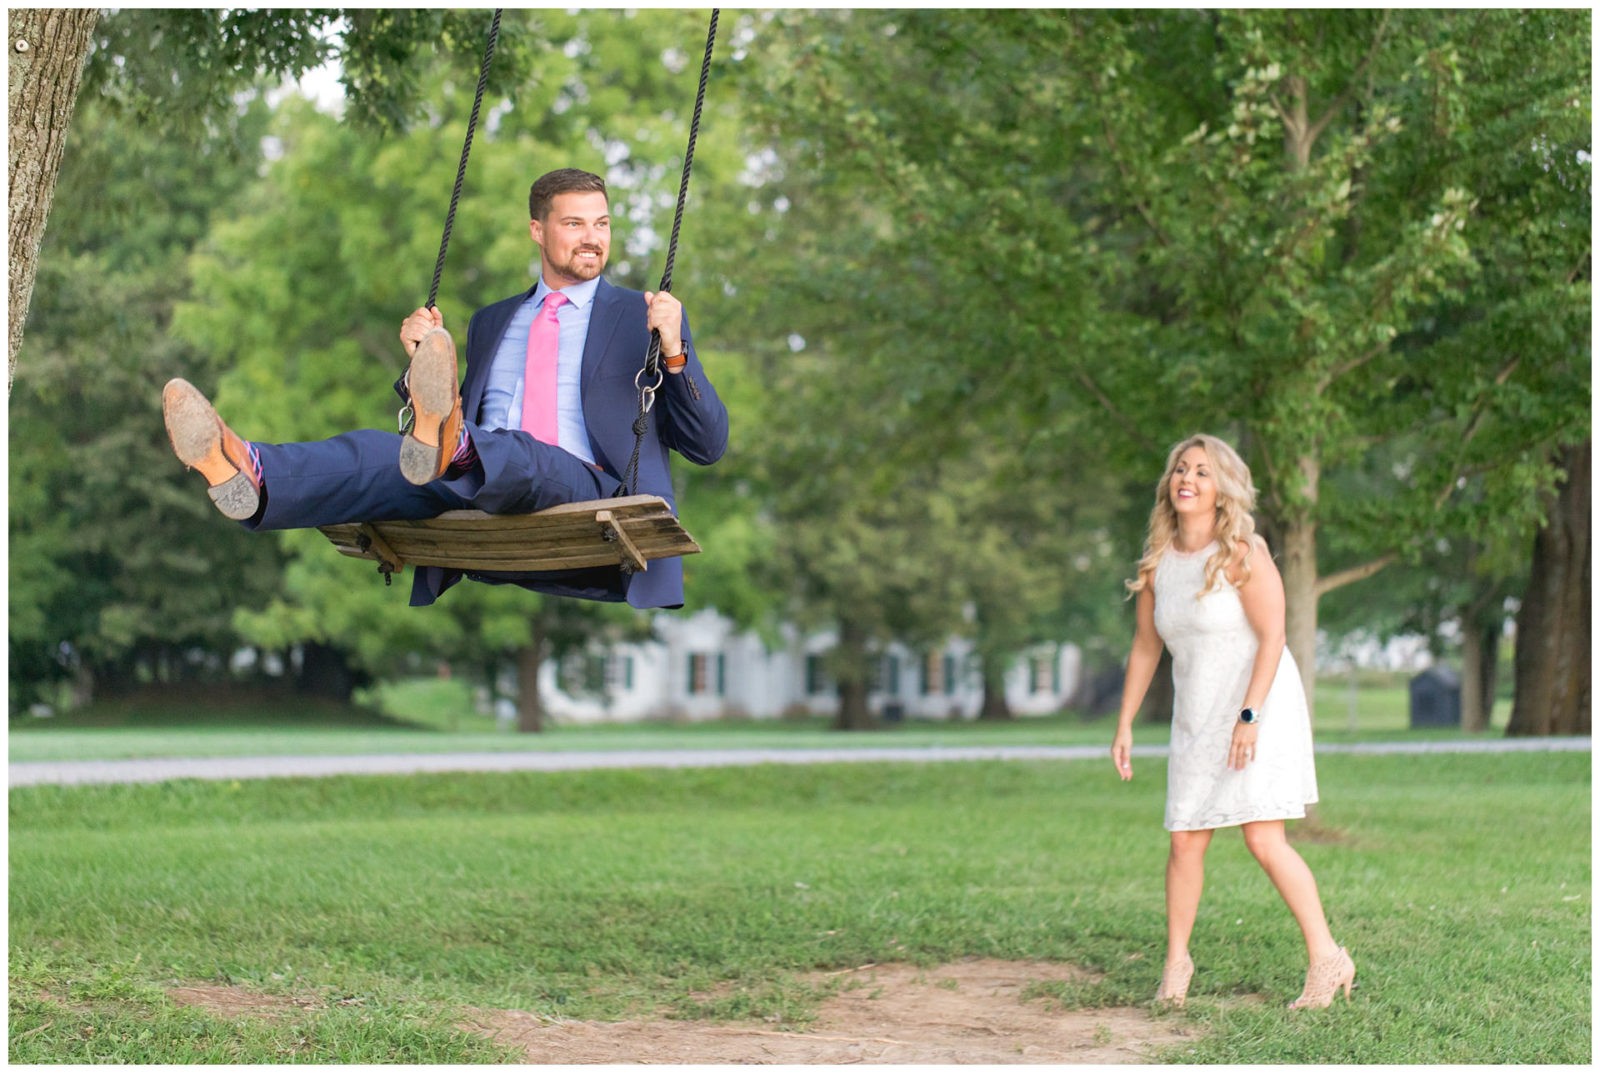 Swing and farm engagement session at Shaker Village in Harrodsburg, Kentucky.